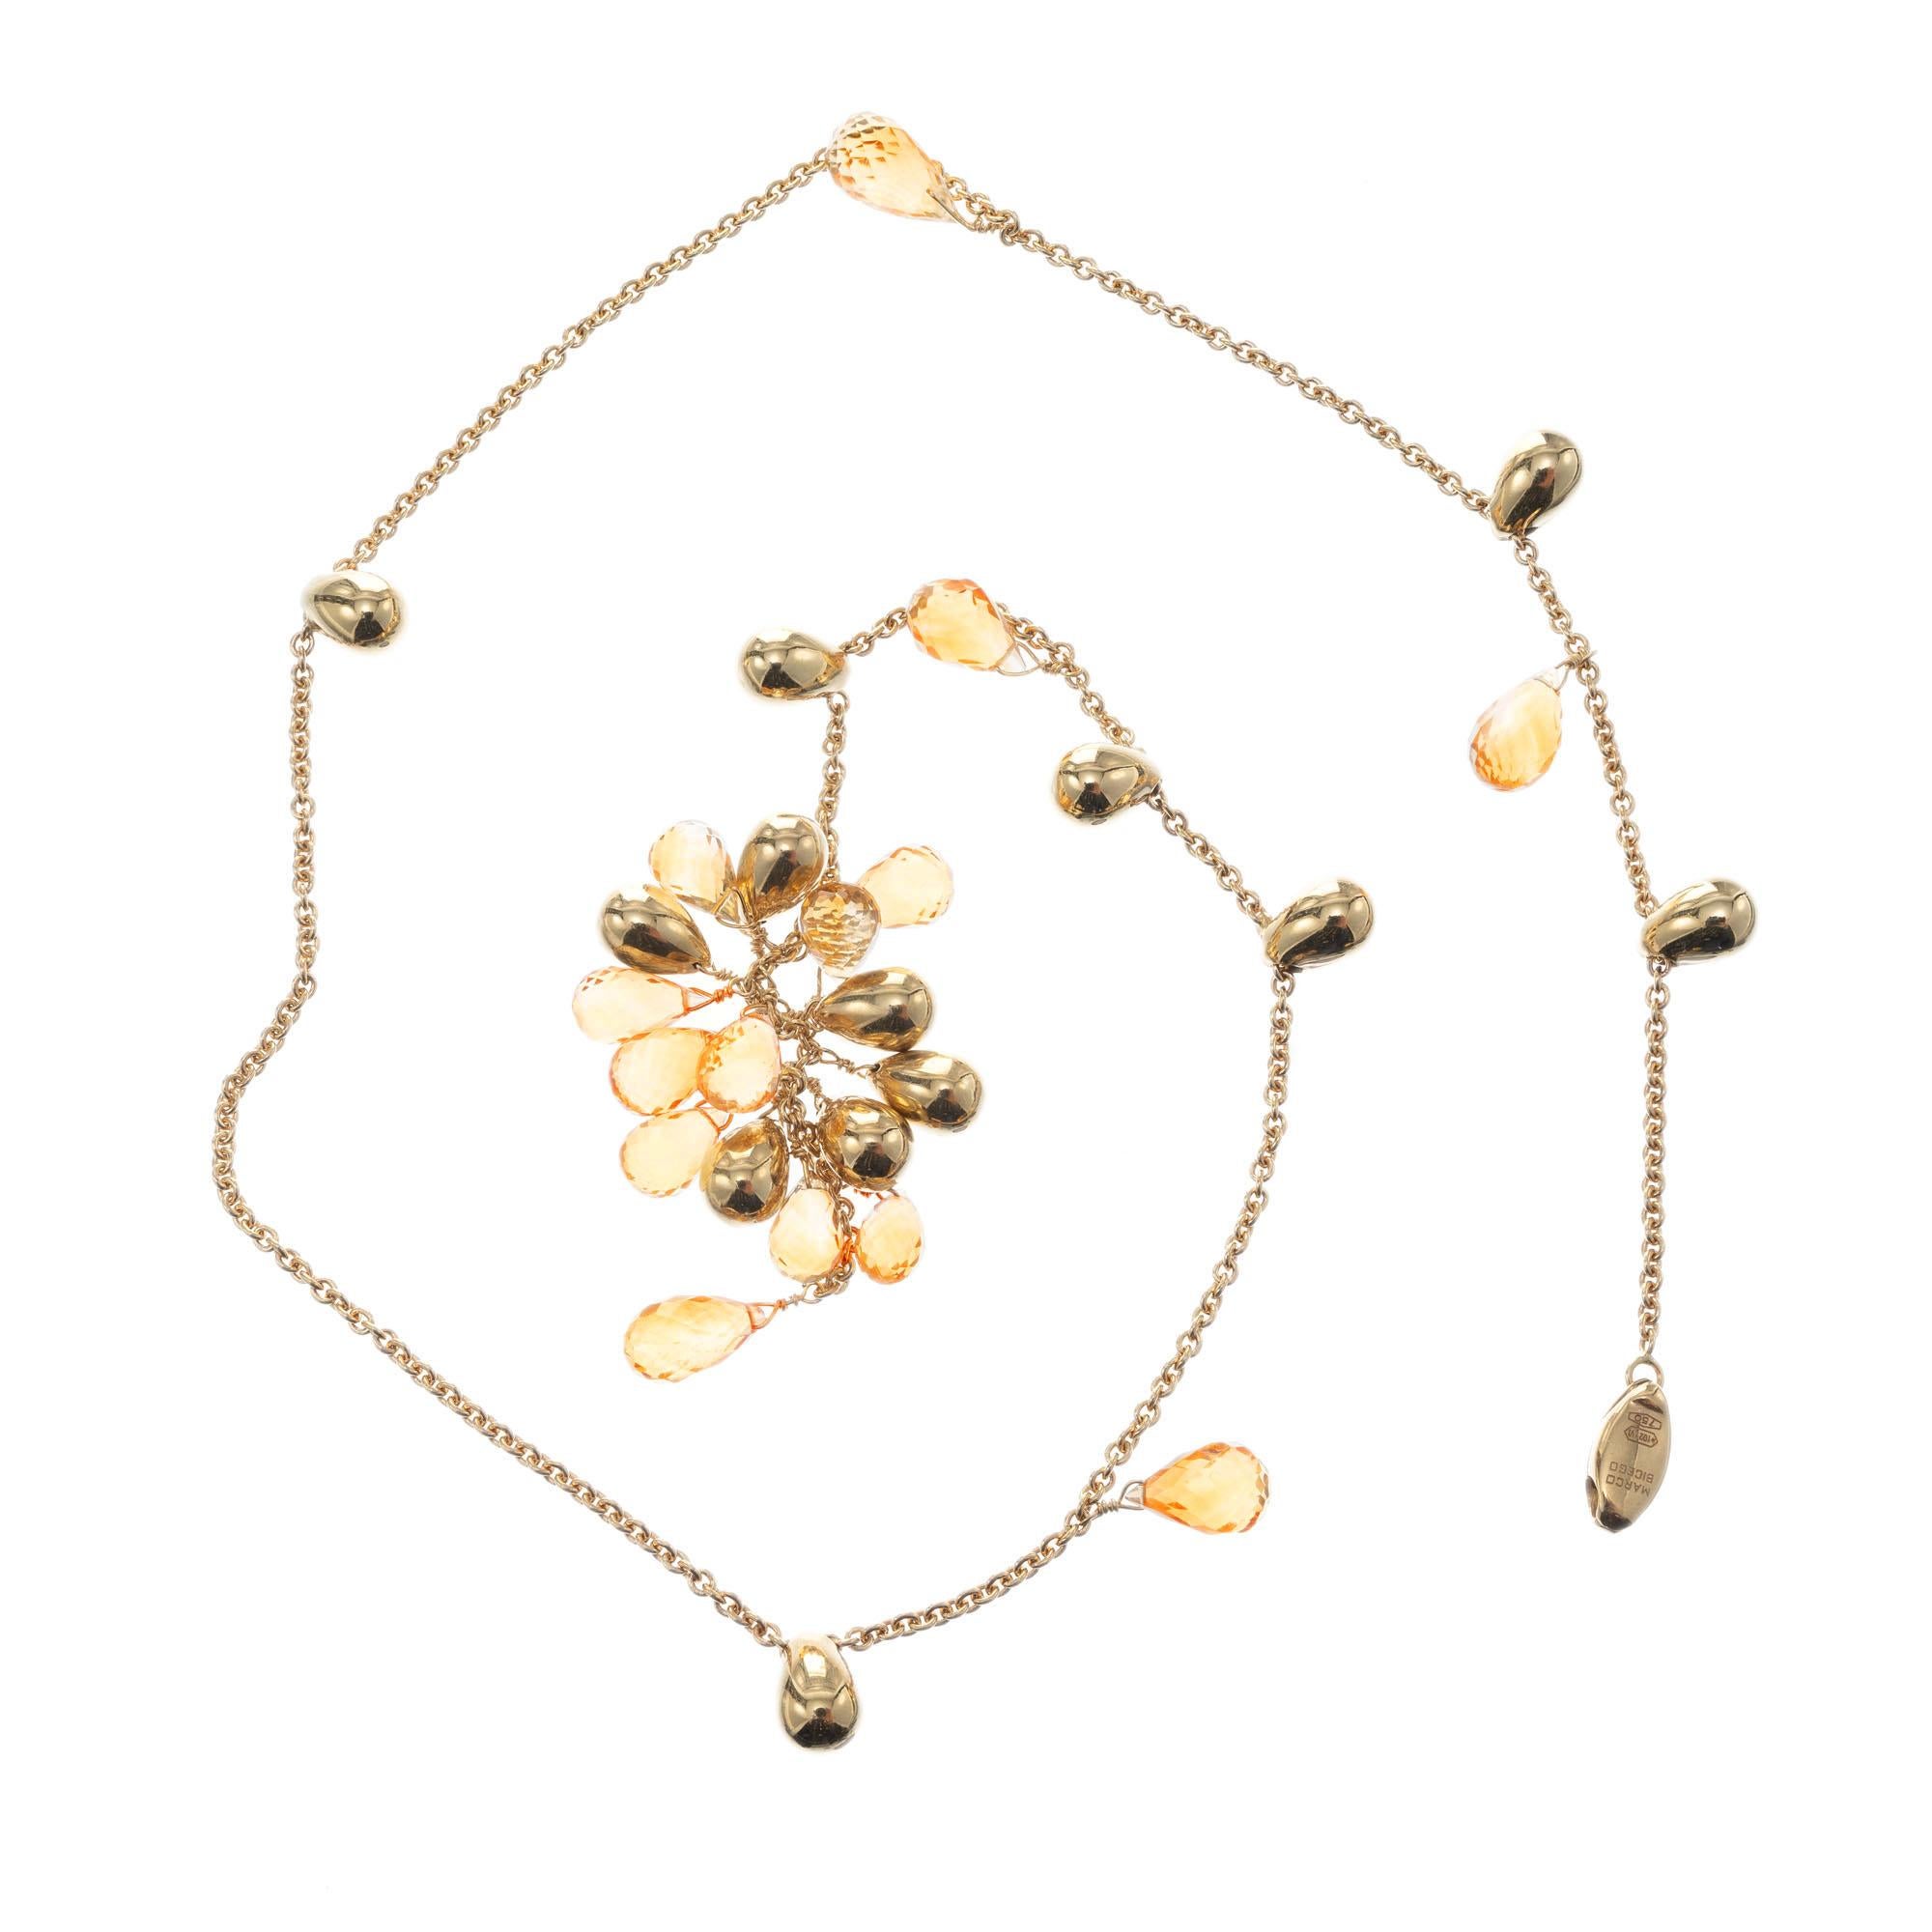 Marco Bicego 18k yellow gold citrine cluster paradise lariat pendant necklace. 13 orange yellow pear shaped briolettes with pear shaped gold dangles on a 16 inch chain. 

13 yellowish orange briolette citrine, approx. 15.00cts
18k yellow gold